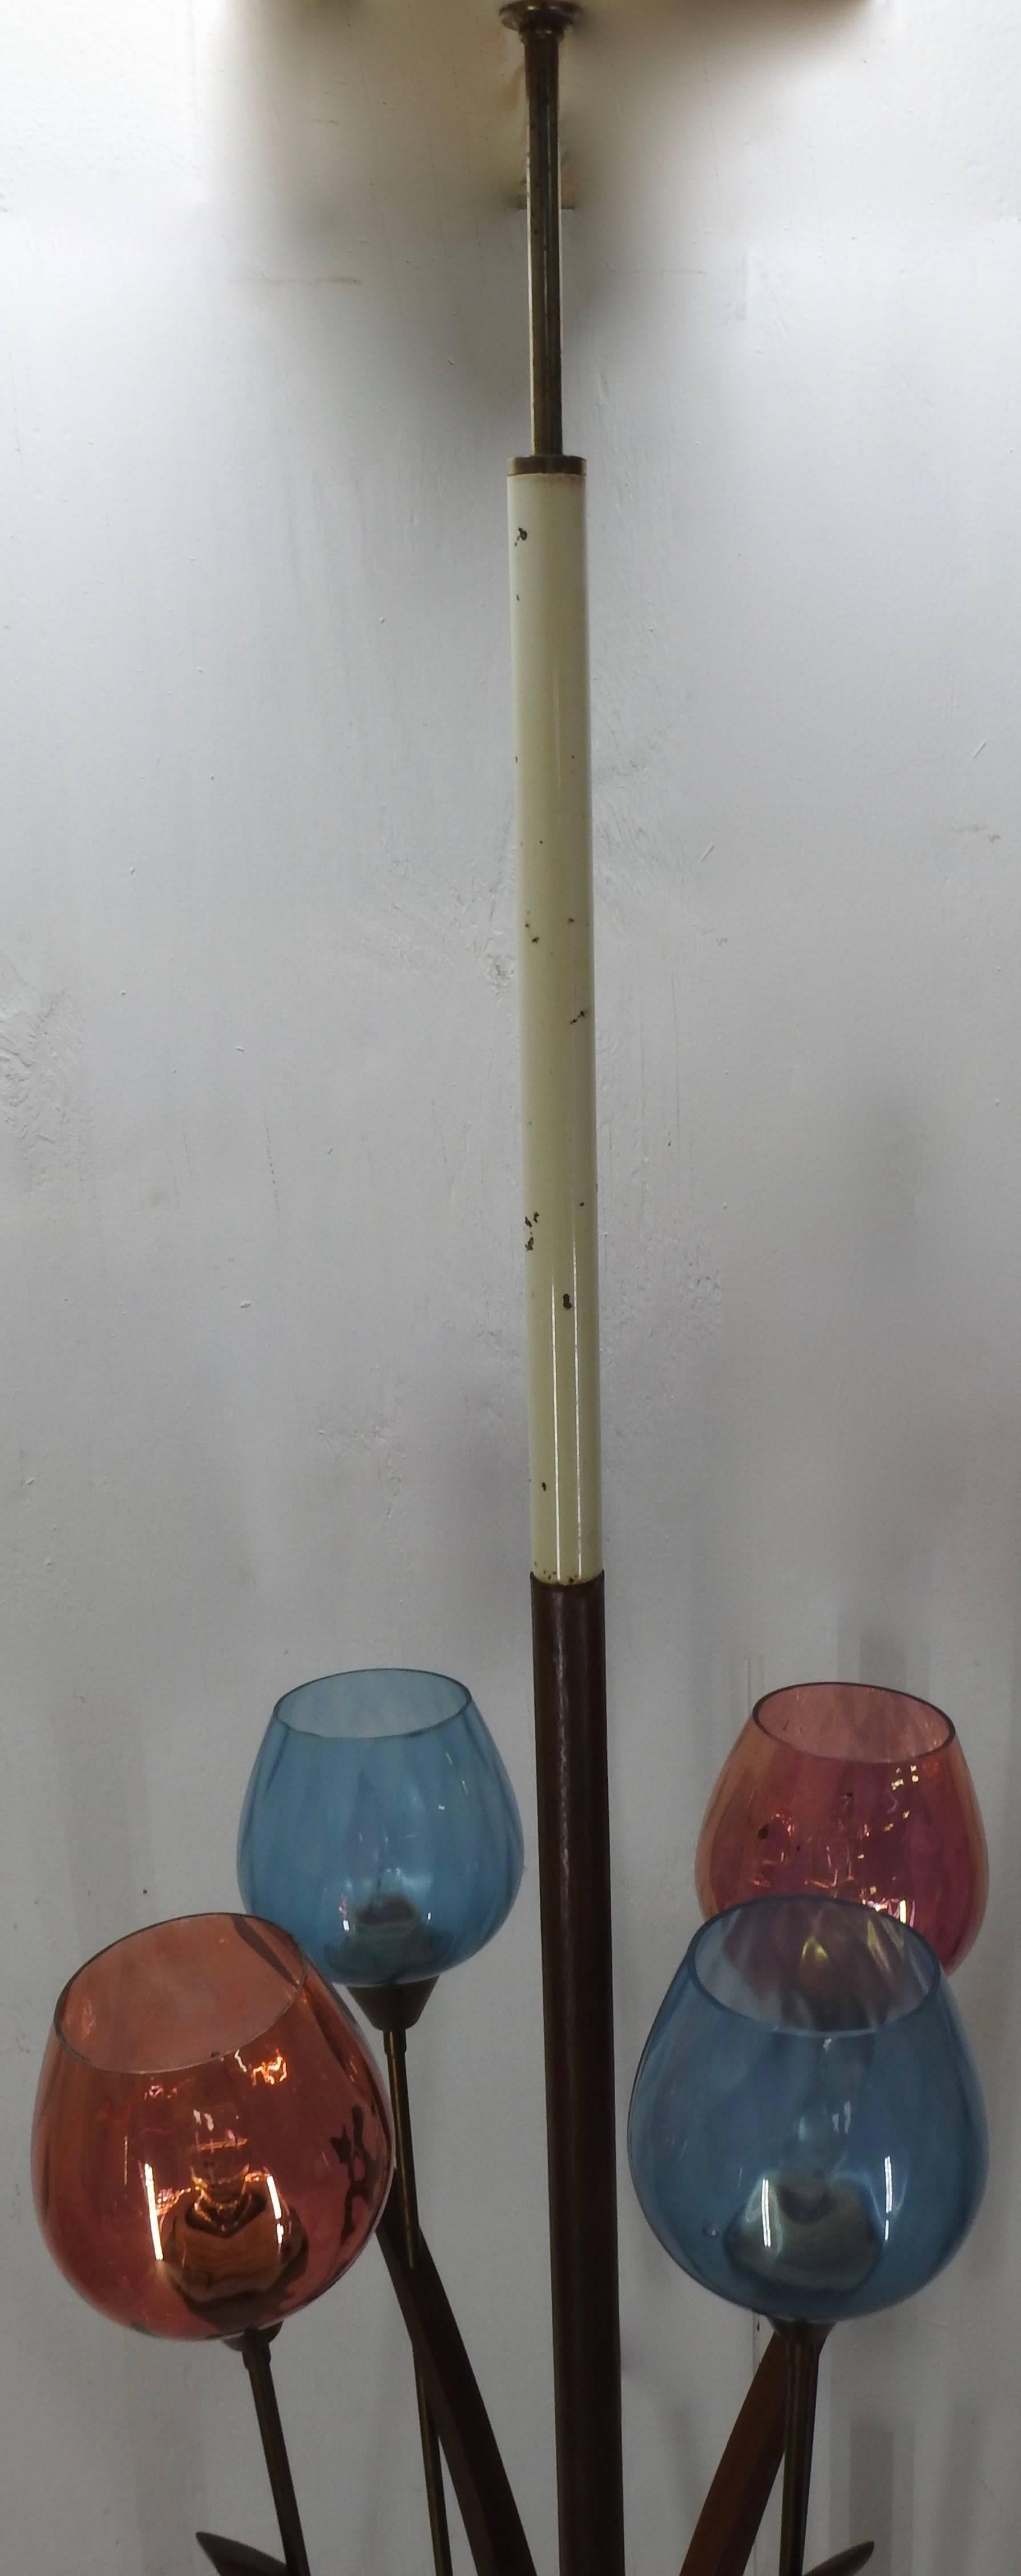 Italian Mid-Century Modern Teak and Glass Tension Lamp For Sale 4